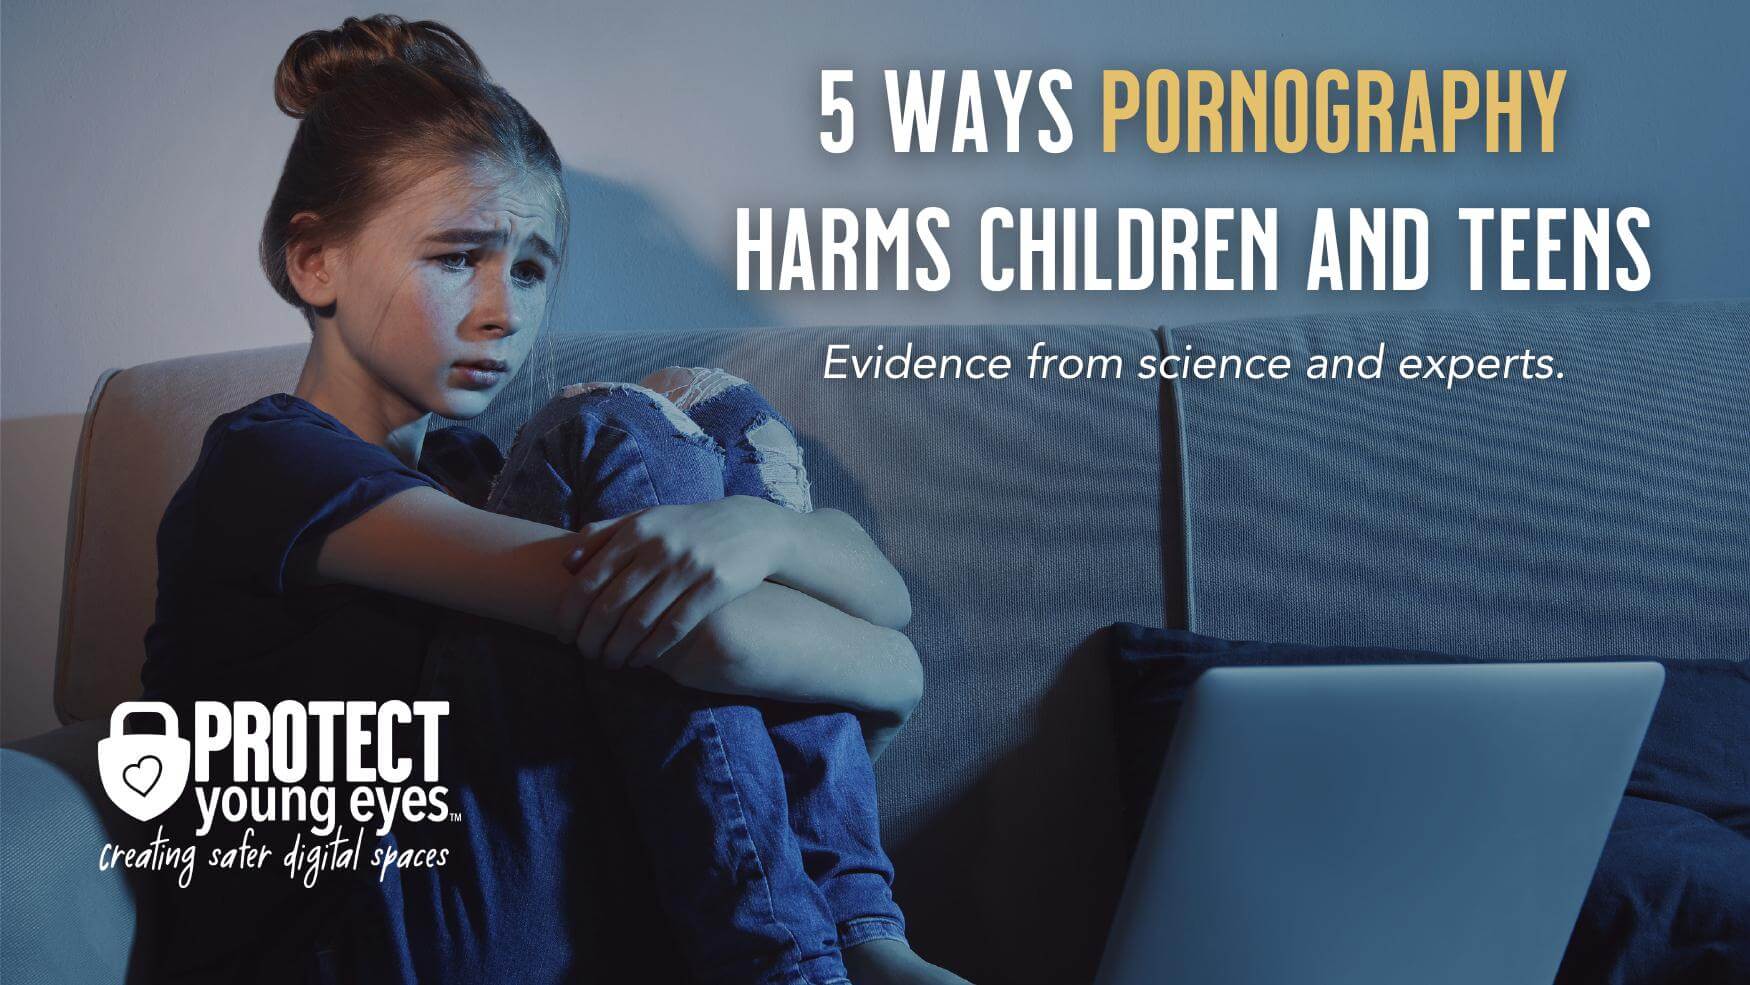 Xnxx 12 To15 - 5 Ways Pornography Harms Children and Teens - Protect Young Eyes